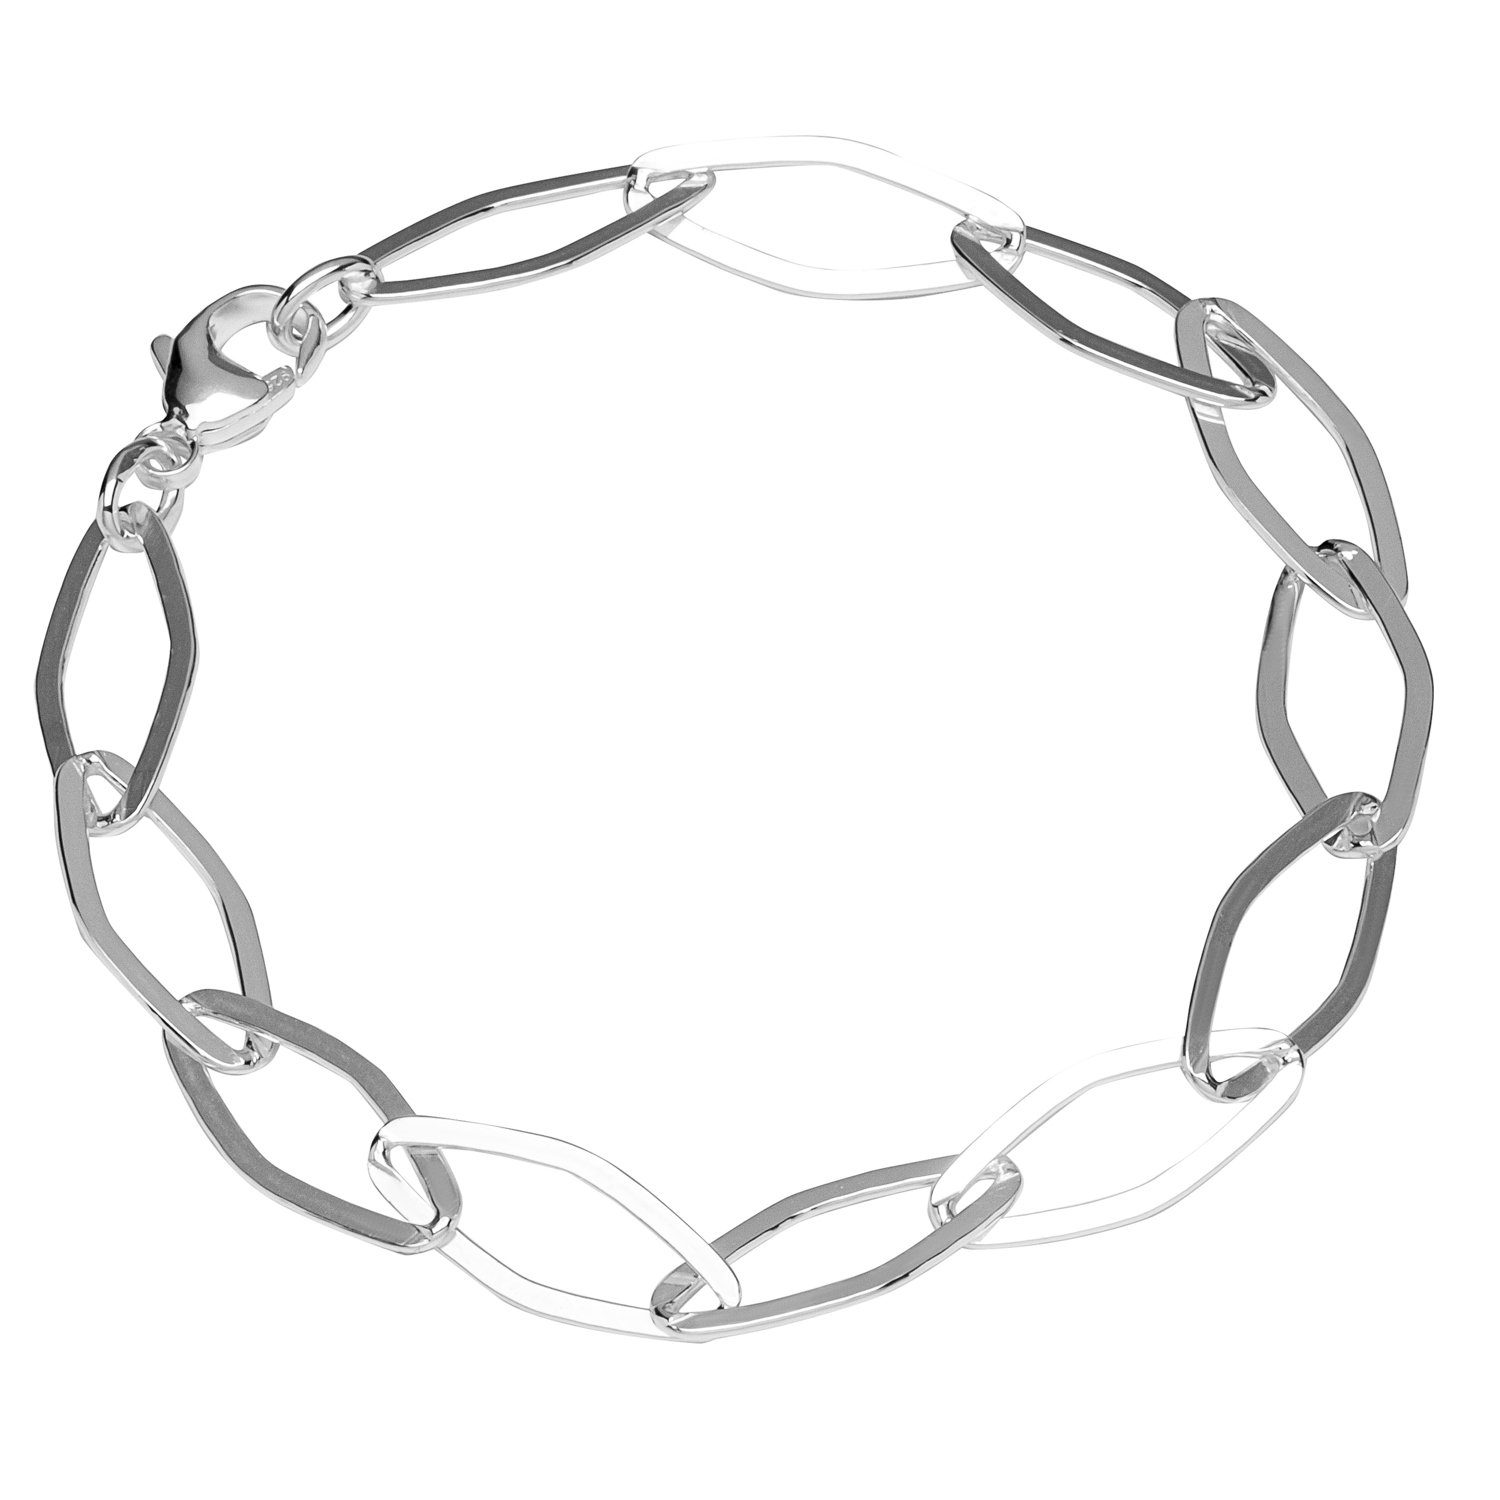 Ankerkette in (1 Stück), flach 19cm 925 Germany Silberarmband Made Sterling Armband Silber NKlaus